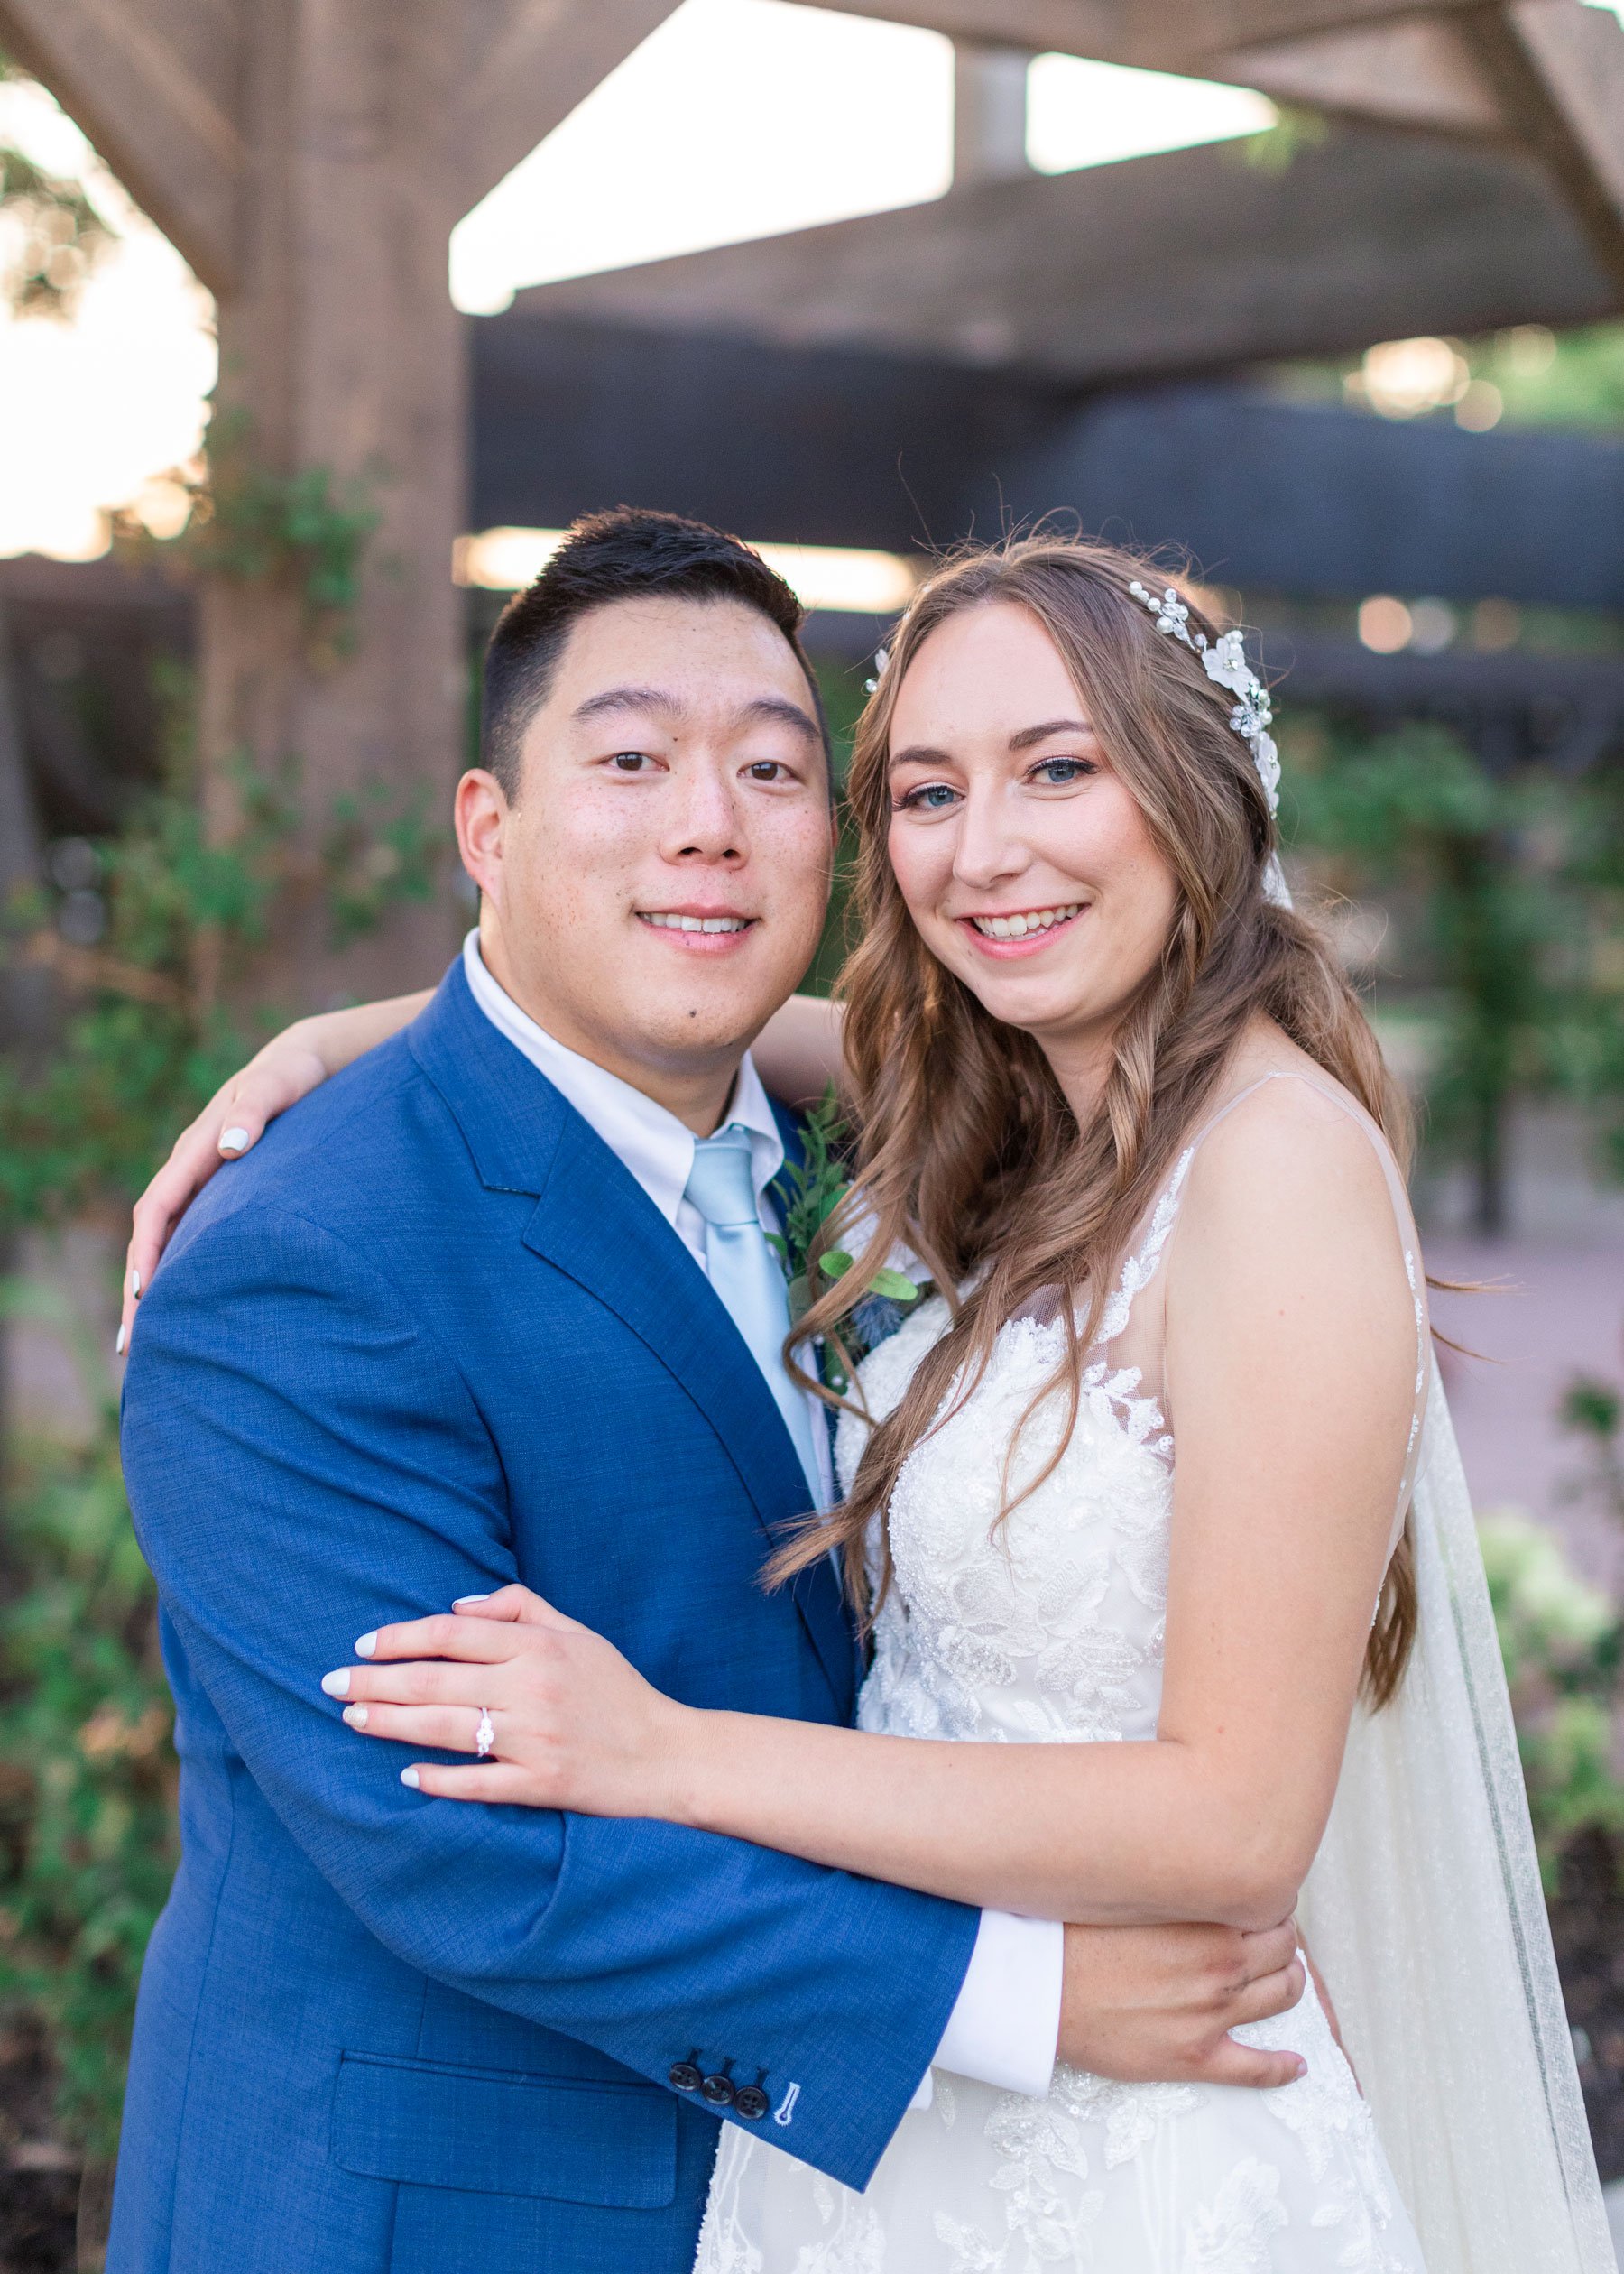  Bride and groom portrait featuring a man with blue suit and tie and a strapless wedding gown at Shade and Home Garden Center in Orem by Savanna Richardson Photography. bride and groom portraits happy couple newlyweds tied the knot #savannarichardson